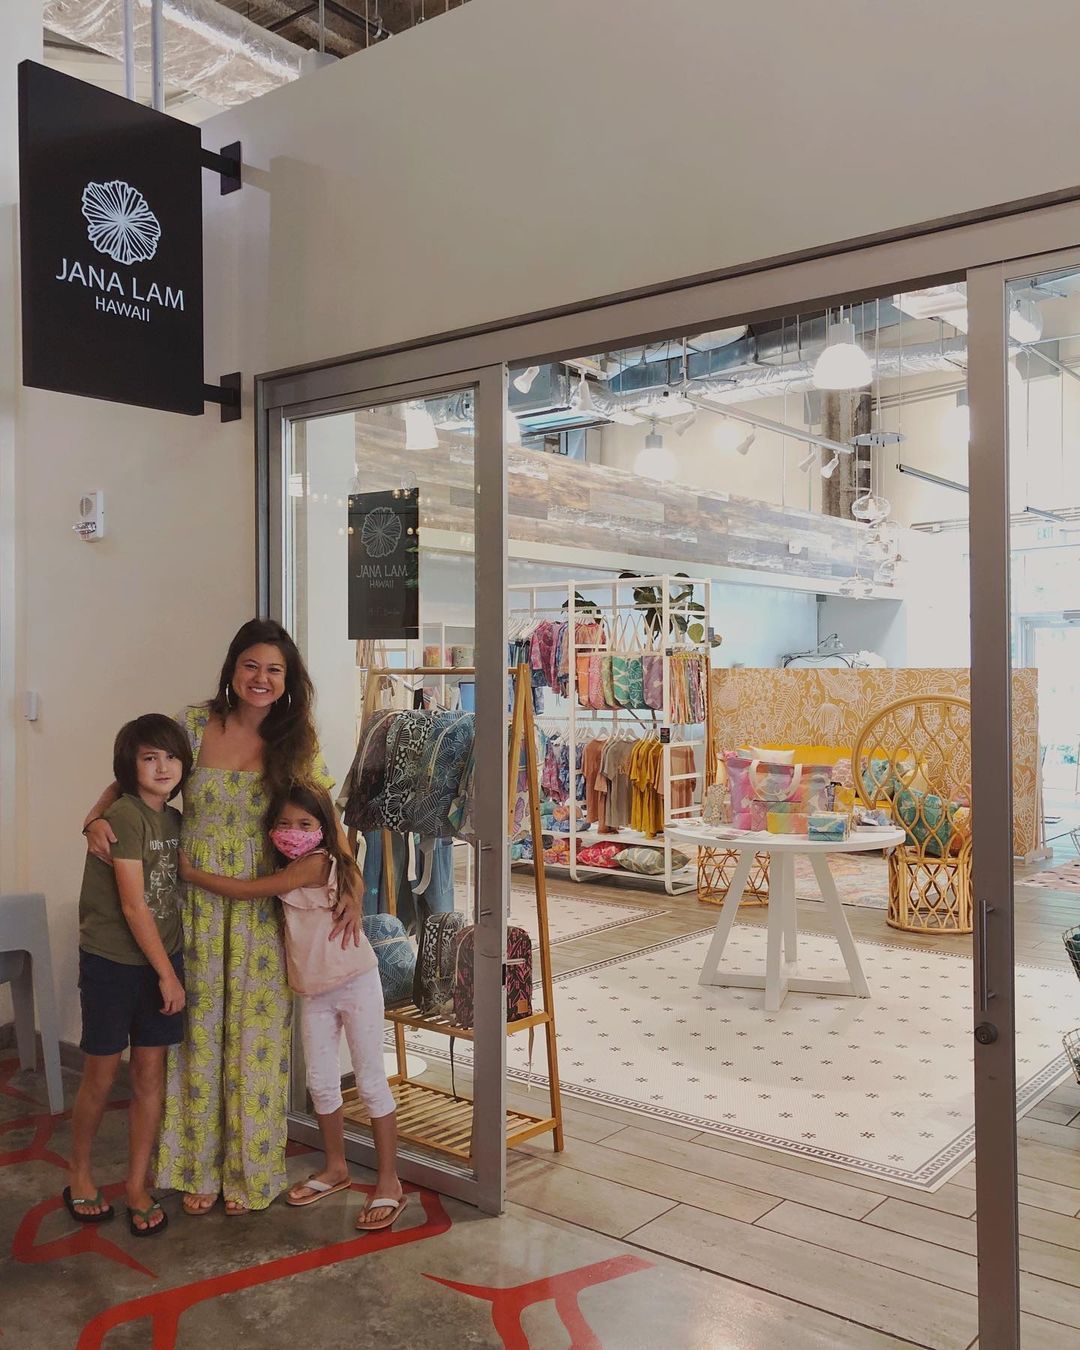 Welcome Honolulu-based design studio @janalam to their new home at South Shore Market, bringing hand-printed and sewn products to a brand-new storefront. Helmed by artist and designer Jana Lam, the shop offers everything from one-of-a-kind pillows to bags, each piece designed to share aloha.